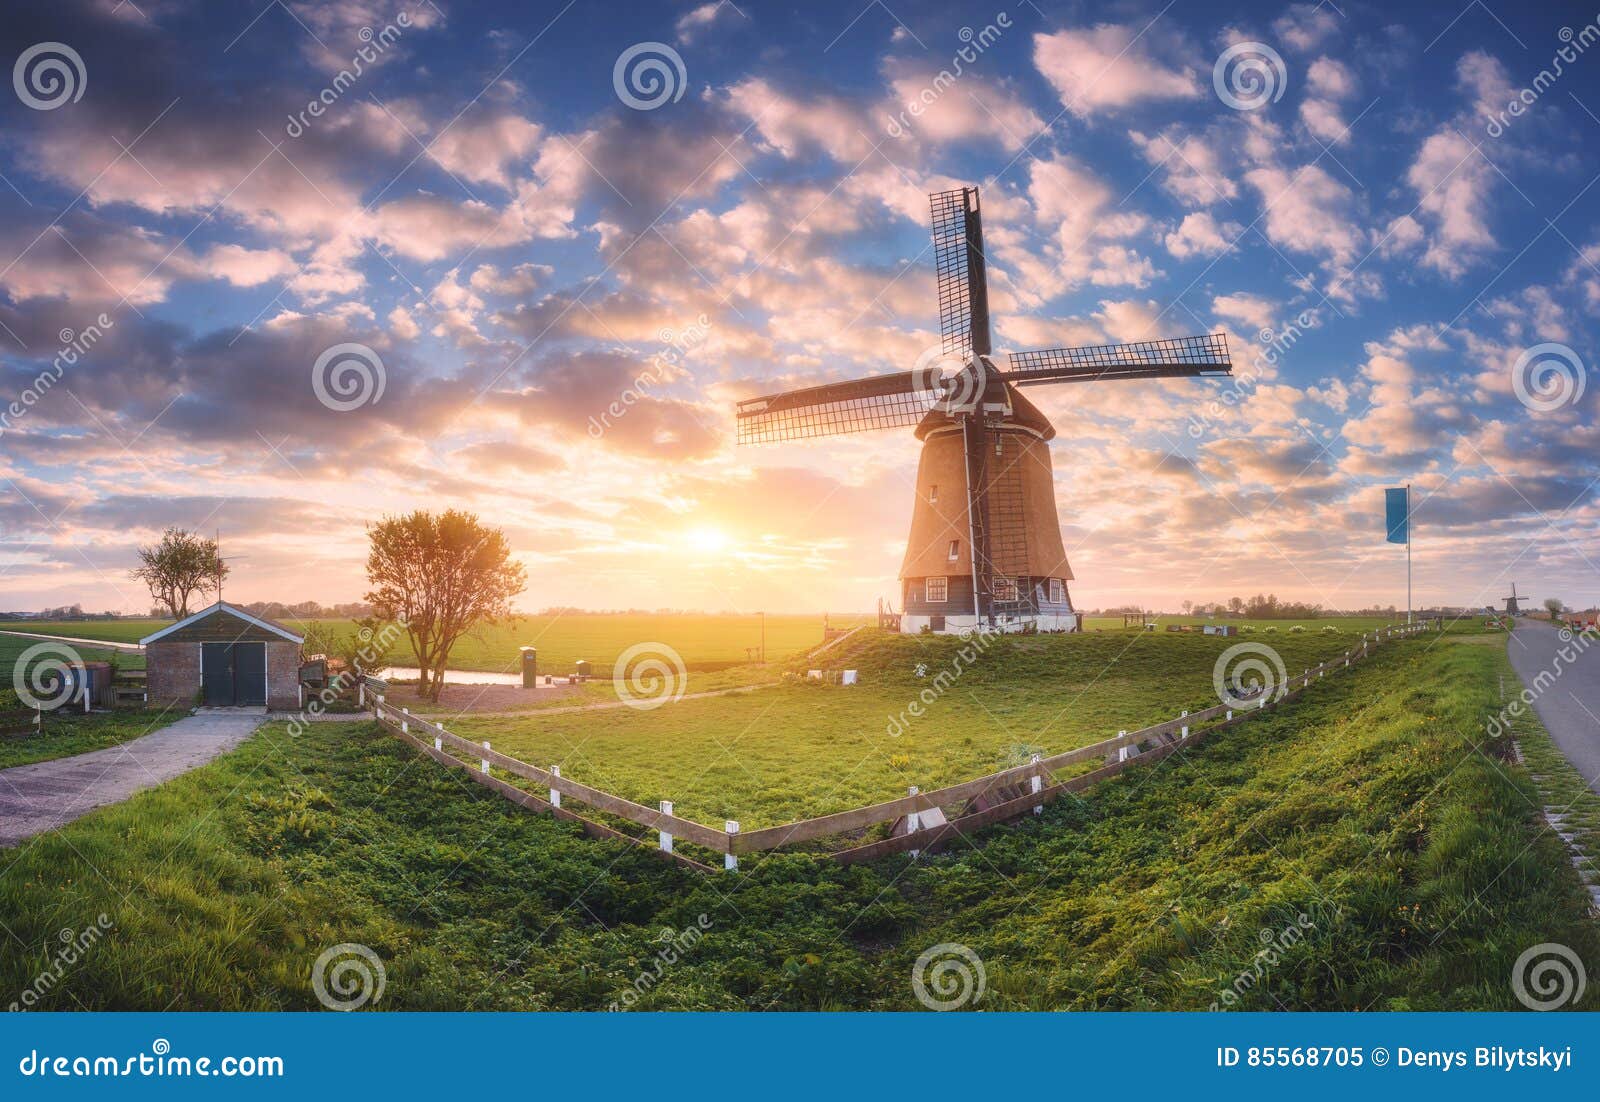 windmill at sunrise in netherlands. spring panoramic landscape